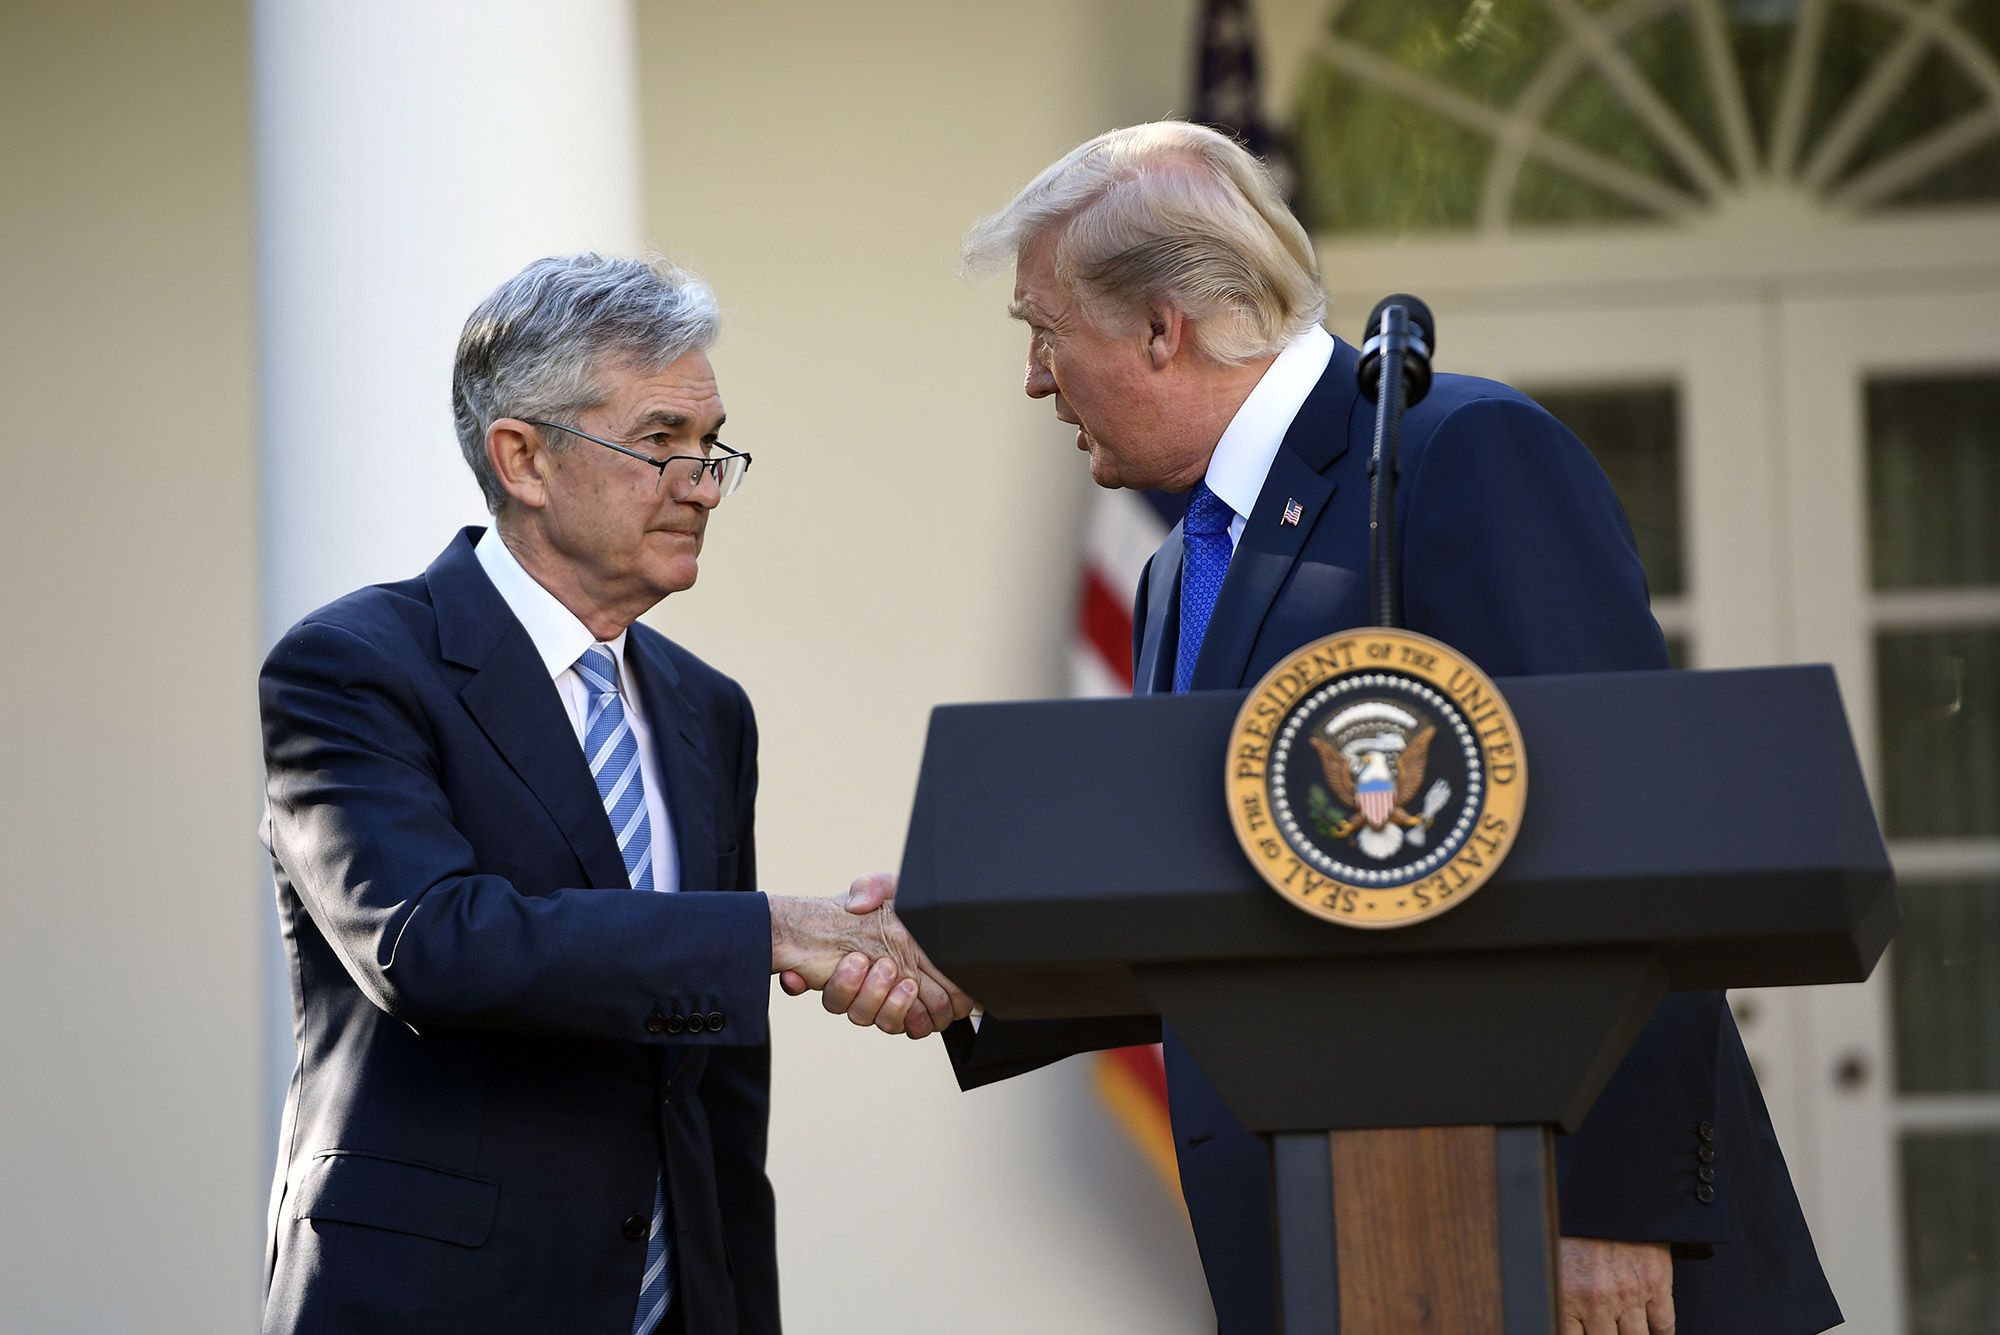 Fed chief Powell has had multiple short phone calls with Trump in 2019